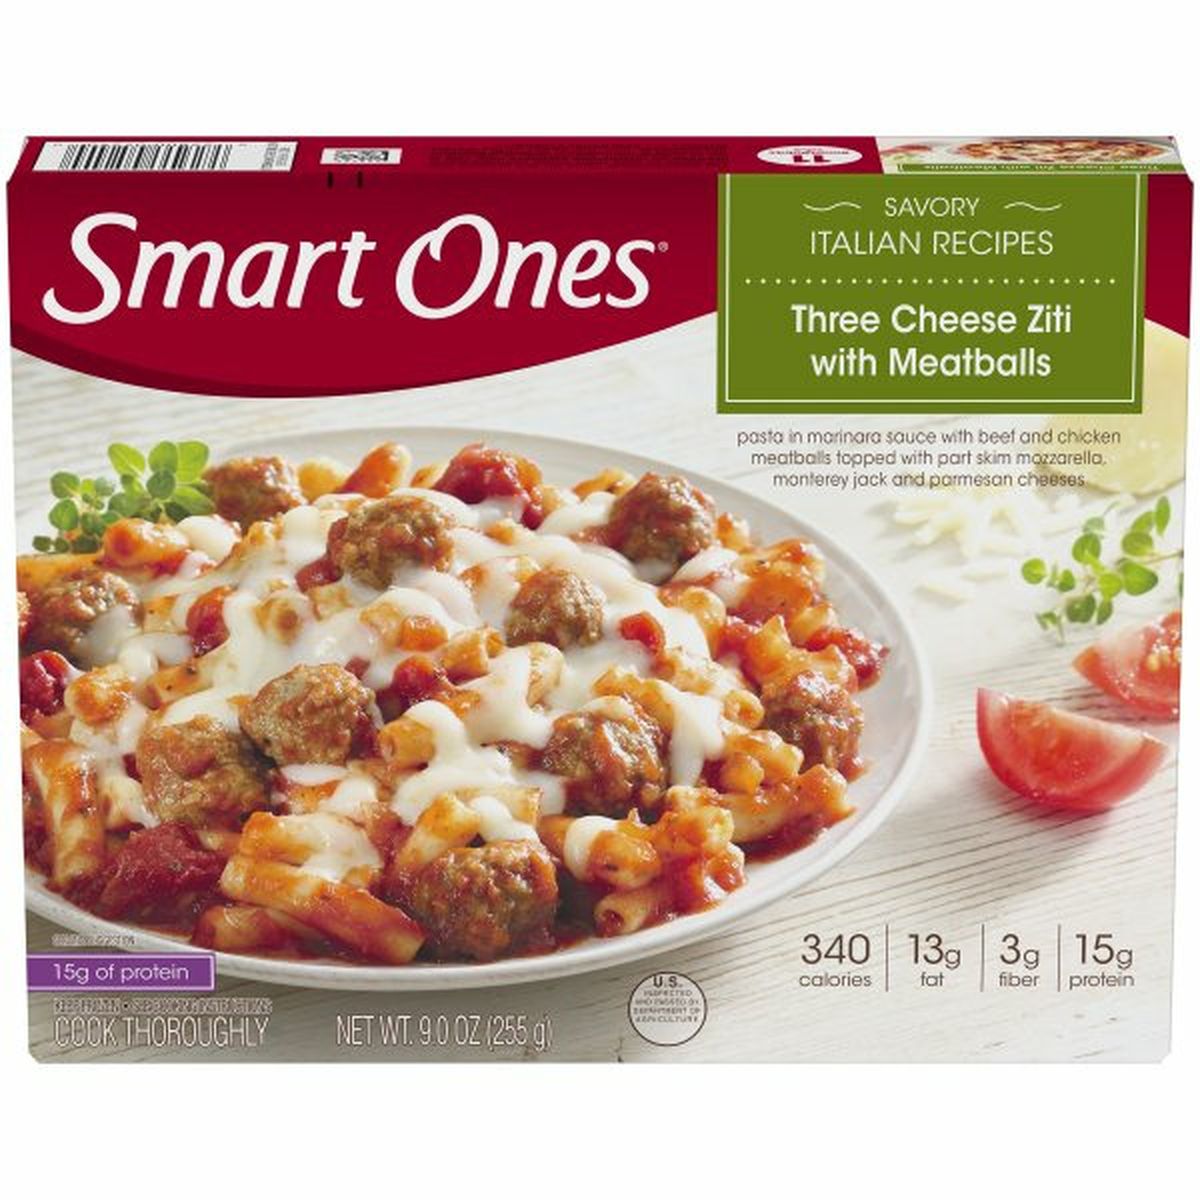 Calories in Smart Ones Savory Italian Recipes Three Cheese Ziti with Meatballs